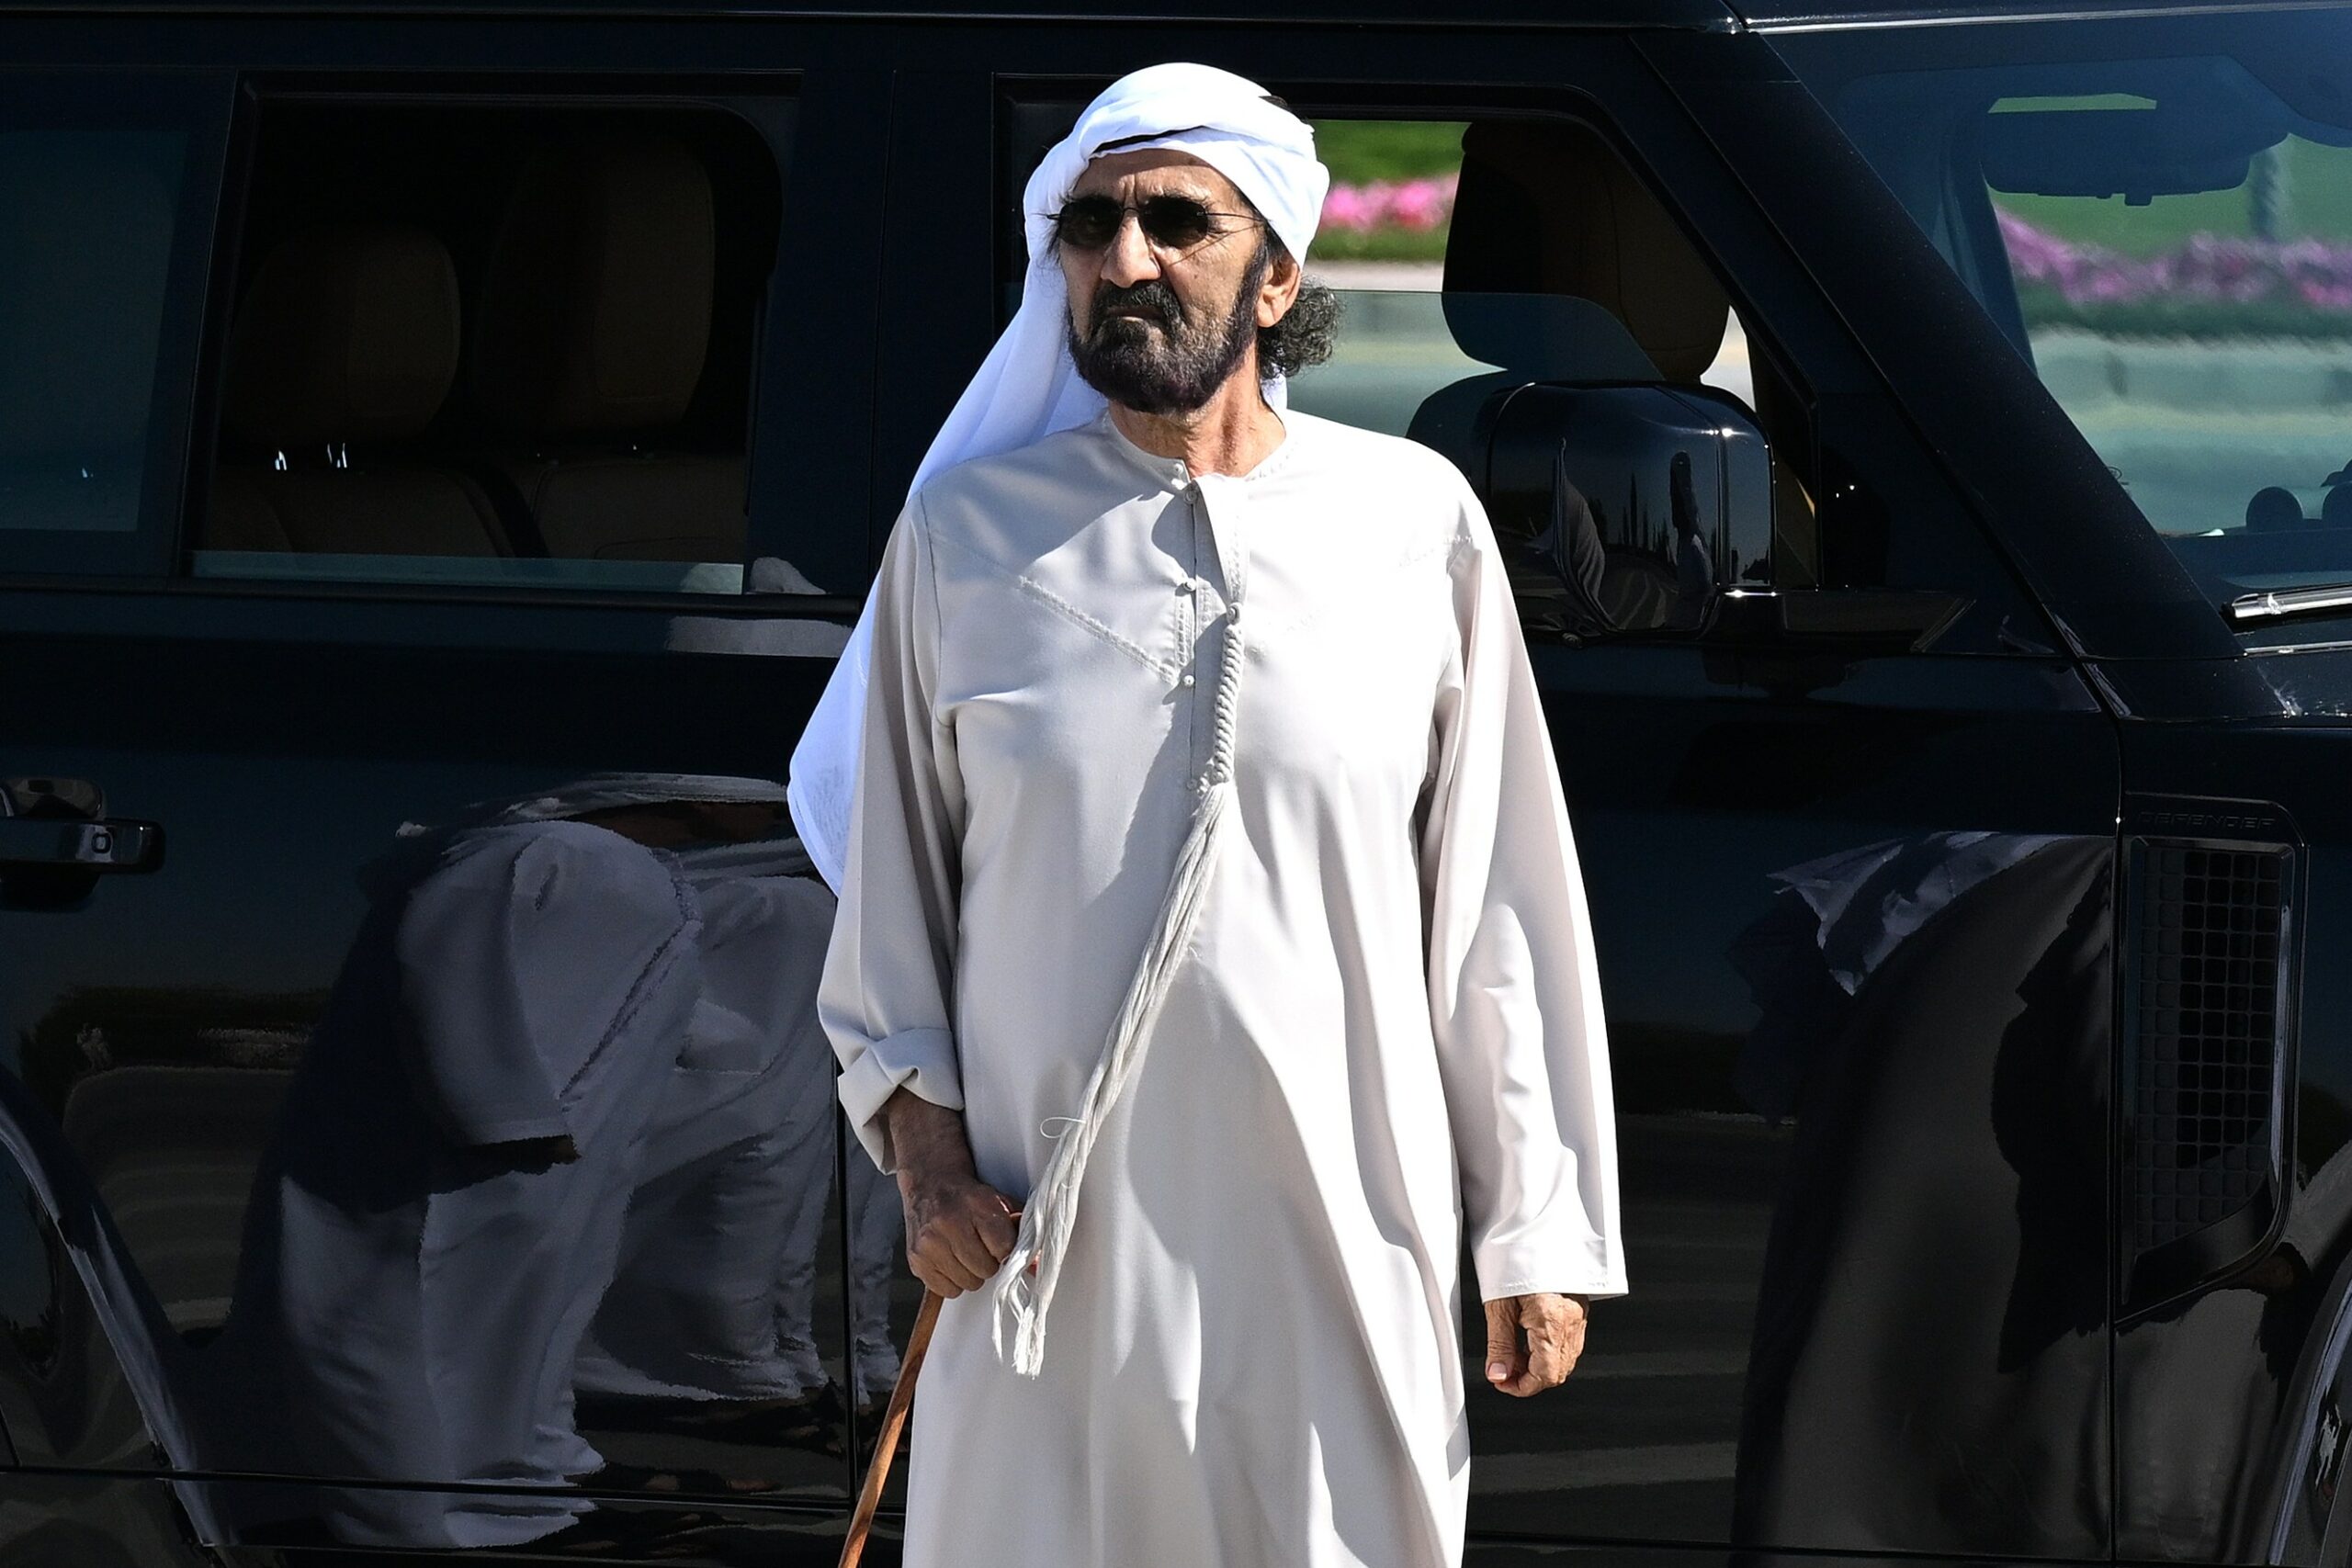 Racing is saddled with Sheikh Mohammed – all we can do is stop cheering